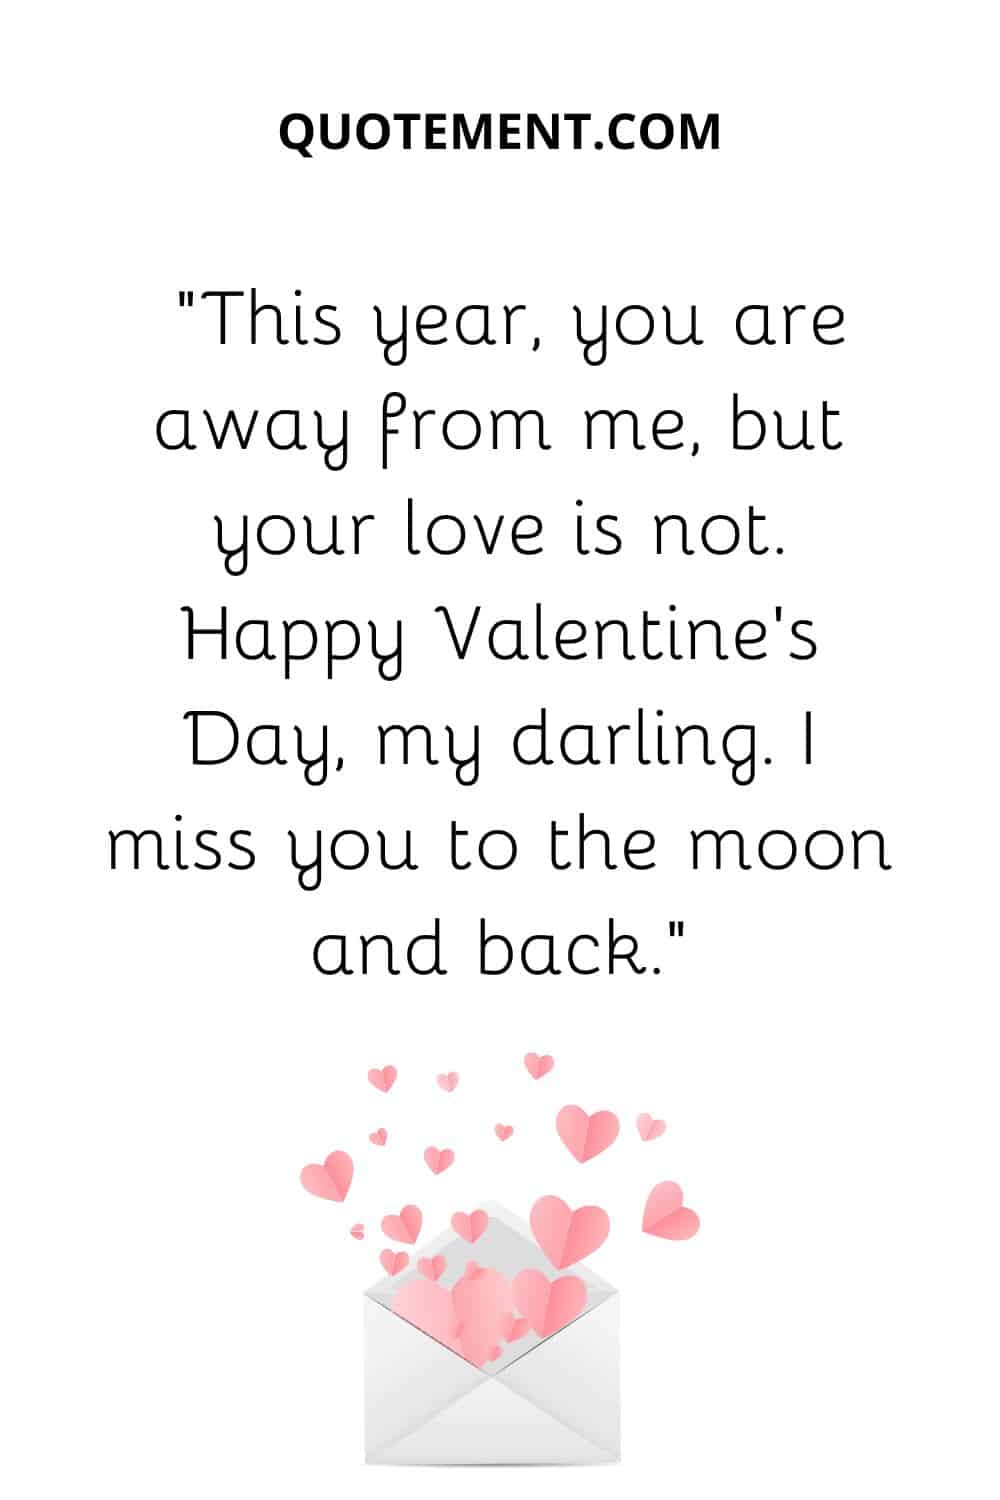 “This year, you are away from me, but your love is not. Happy Valentine’s Day, my darling. I miss you to the moon and back.”